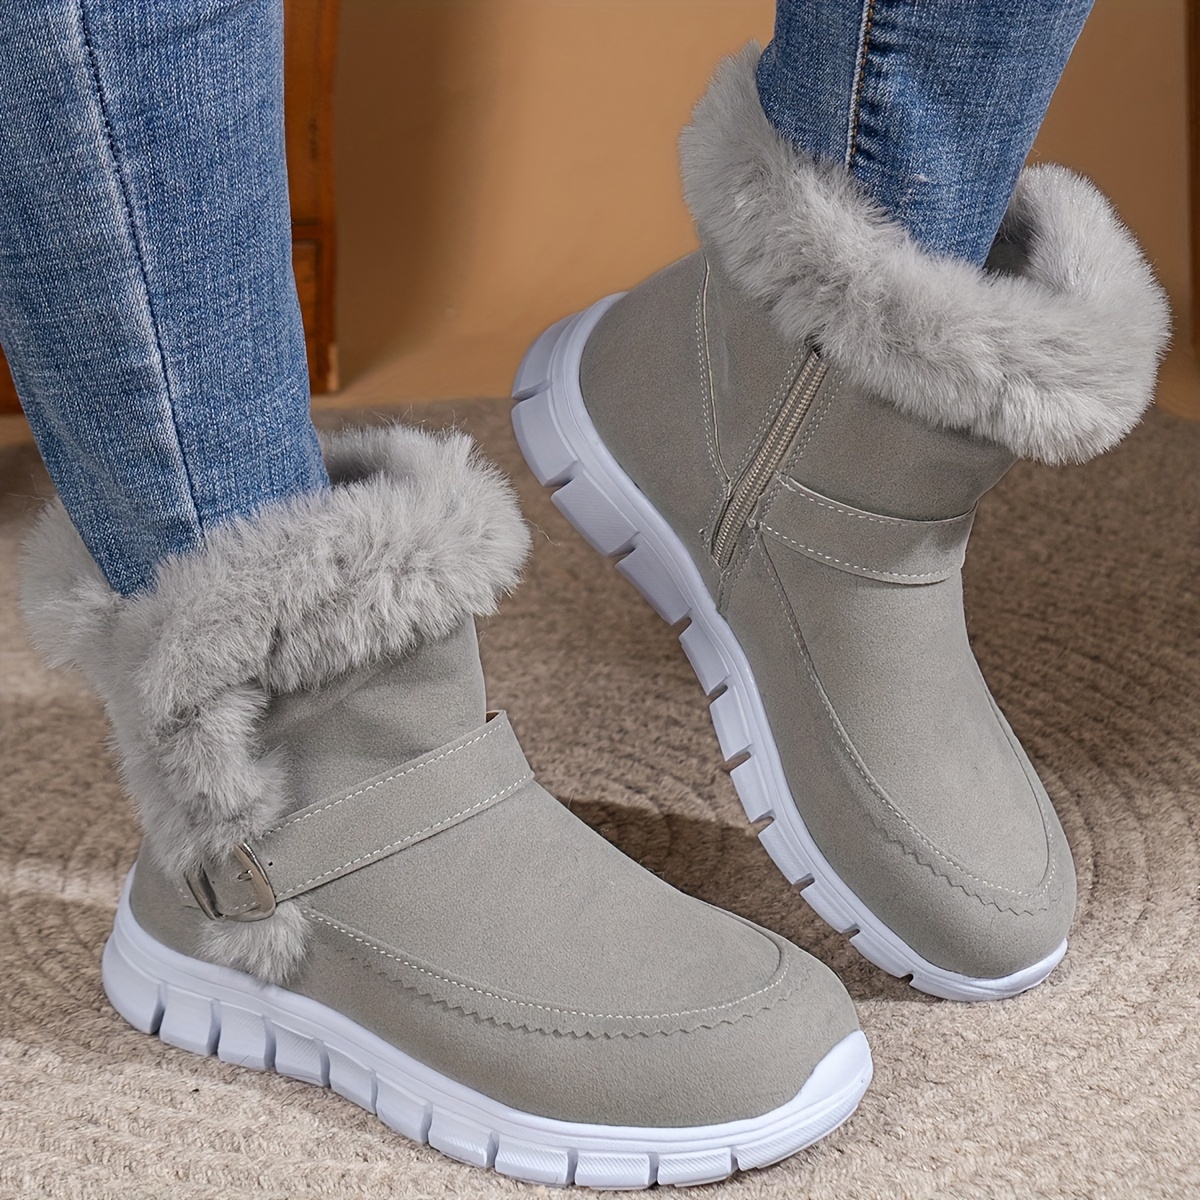 

Women's Winter Snow Boots, Round Toe Faux Fur Lining Thermal Mid Calf Boots, Buckle Design Non-slip Comfortable Outdoor Booties